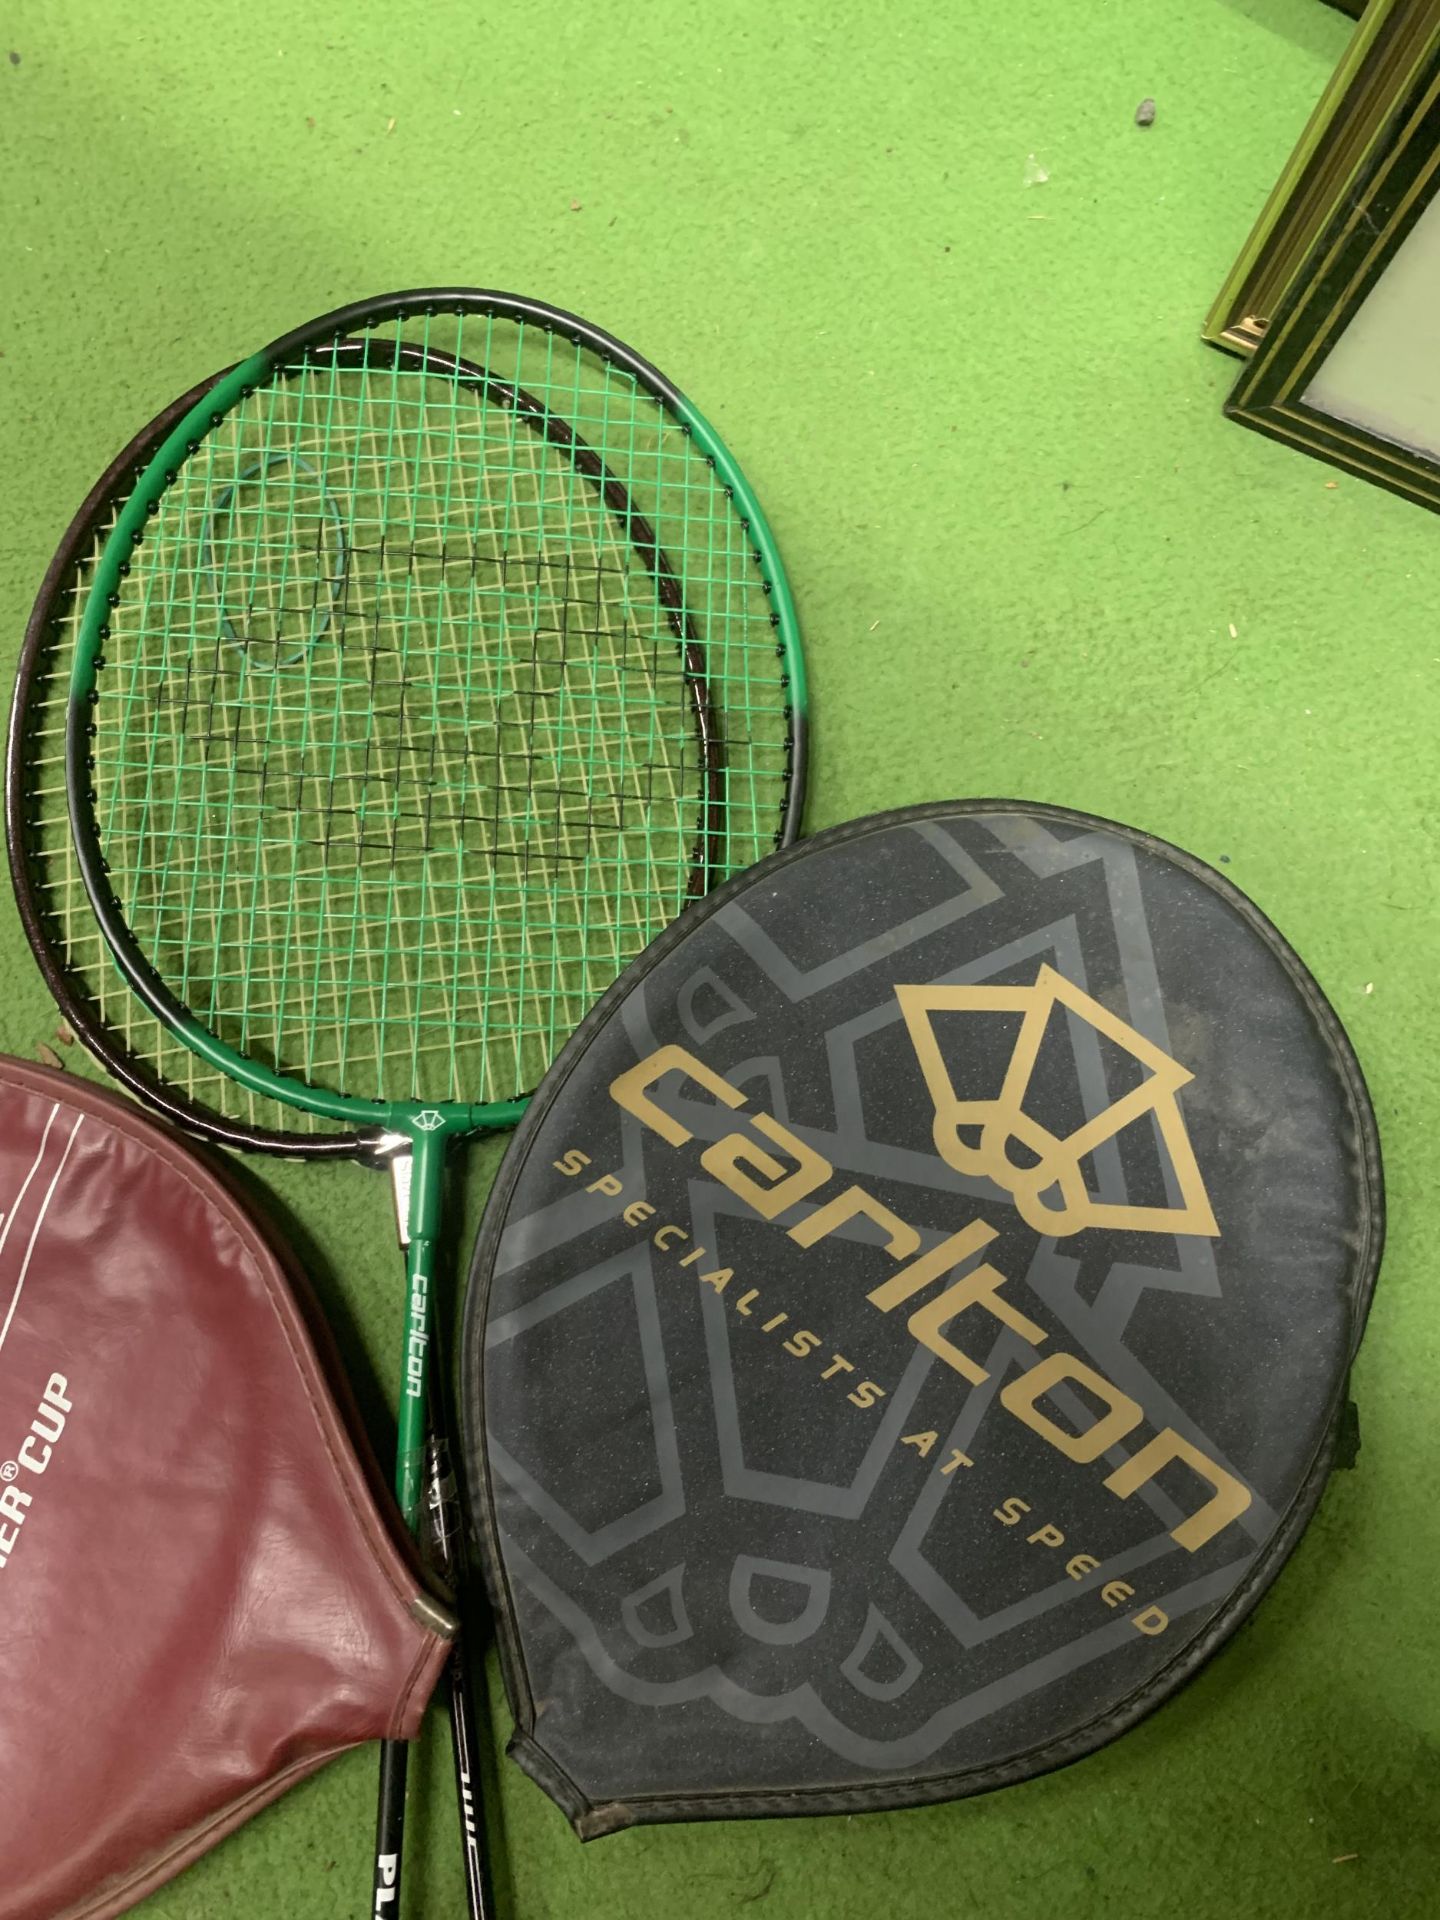 TWO BADMINTON RAQUETS WITH COVERS - Image 3 of 3